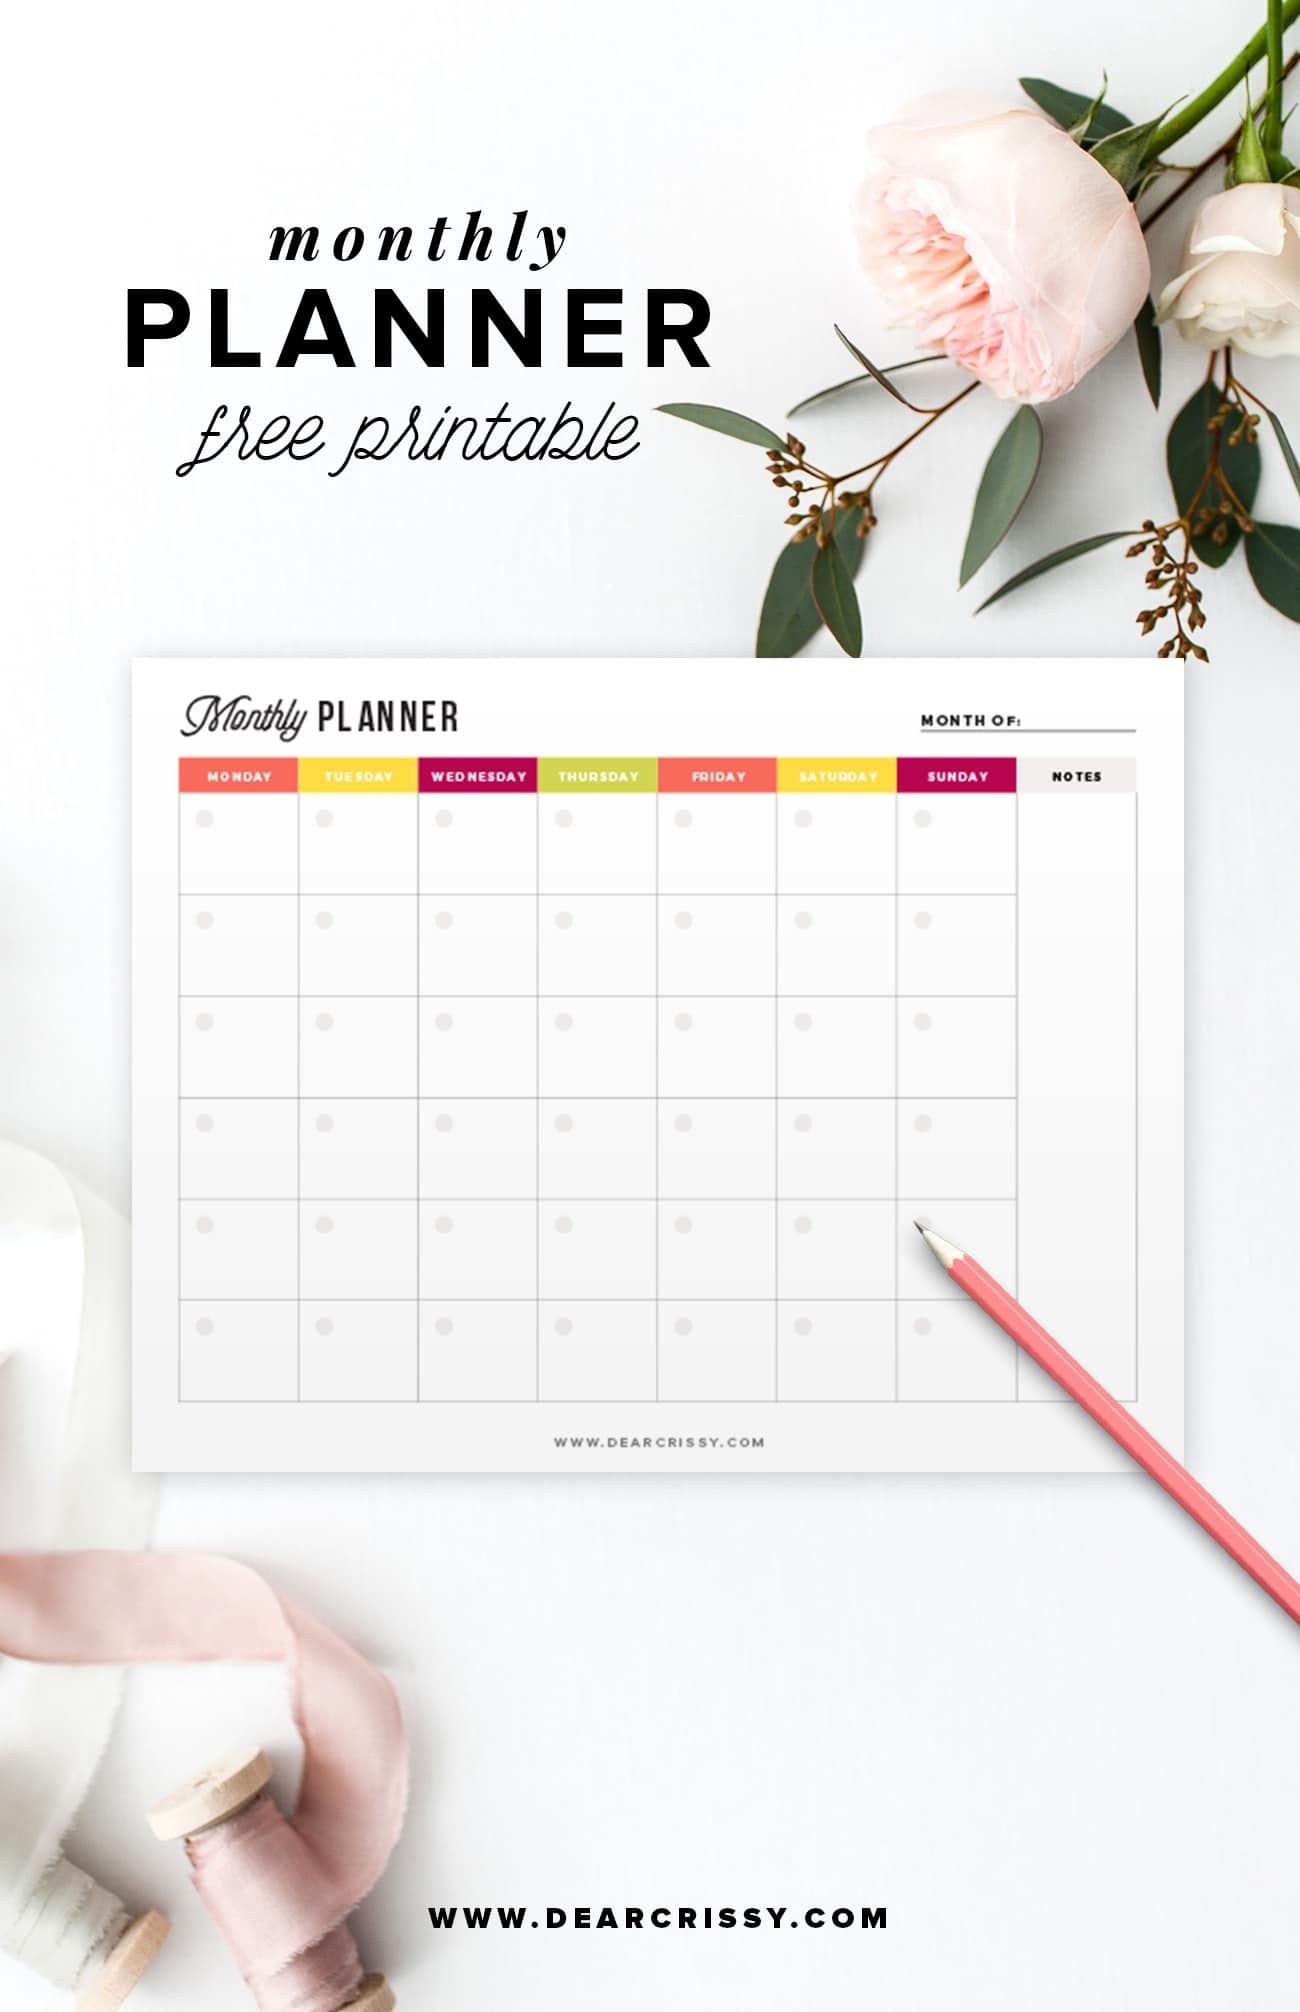 Free Printable Monthly Planner Start Planning Your Month